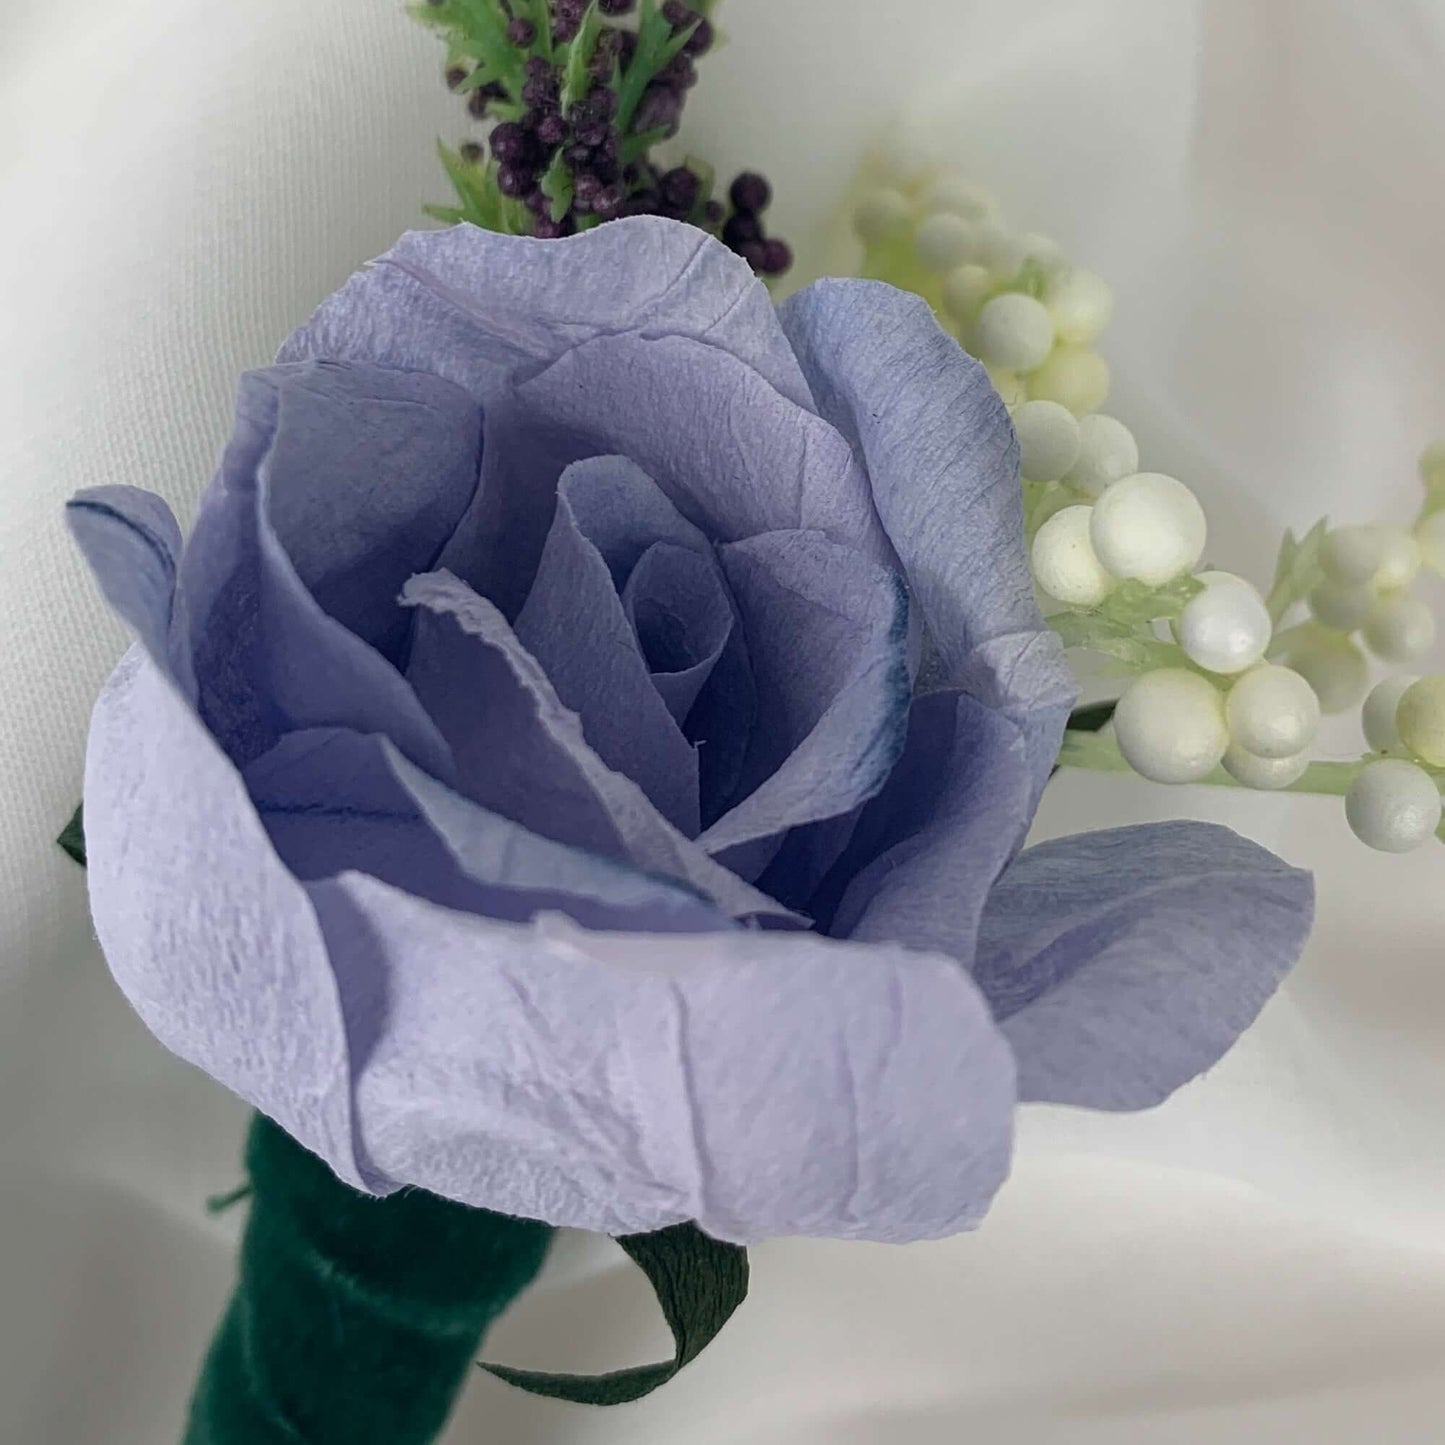 A beautiful hand-crafted paper (faux) large mauve rose boutonnieres, with a green satin stem, mixed with artificial flowers and foliage, are made to order to match your wedding theme colour and are perfect for the groom, the groomsmen, and fathers for you